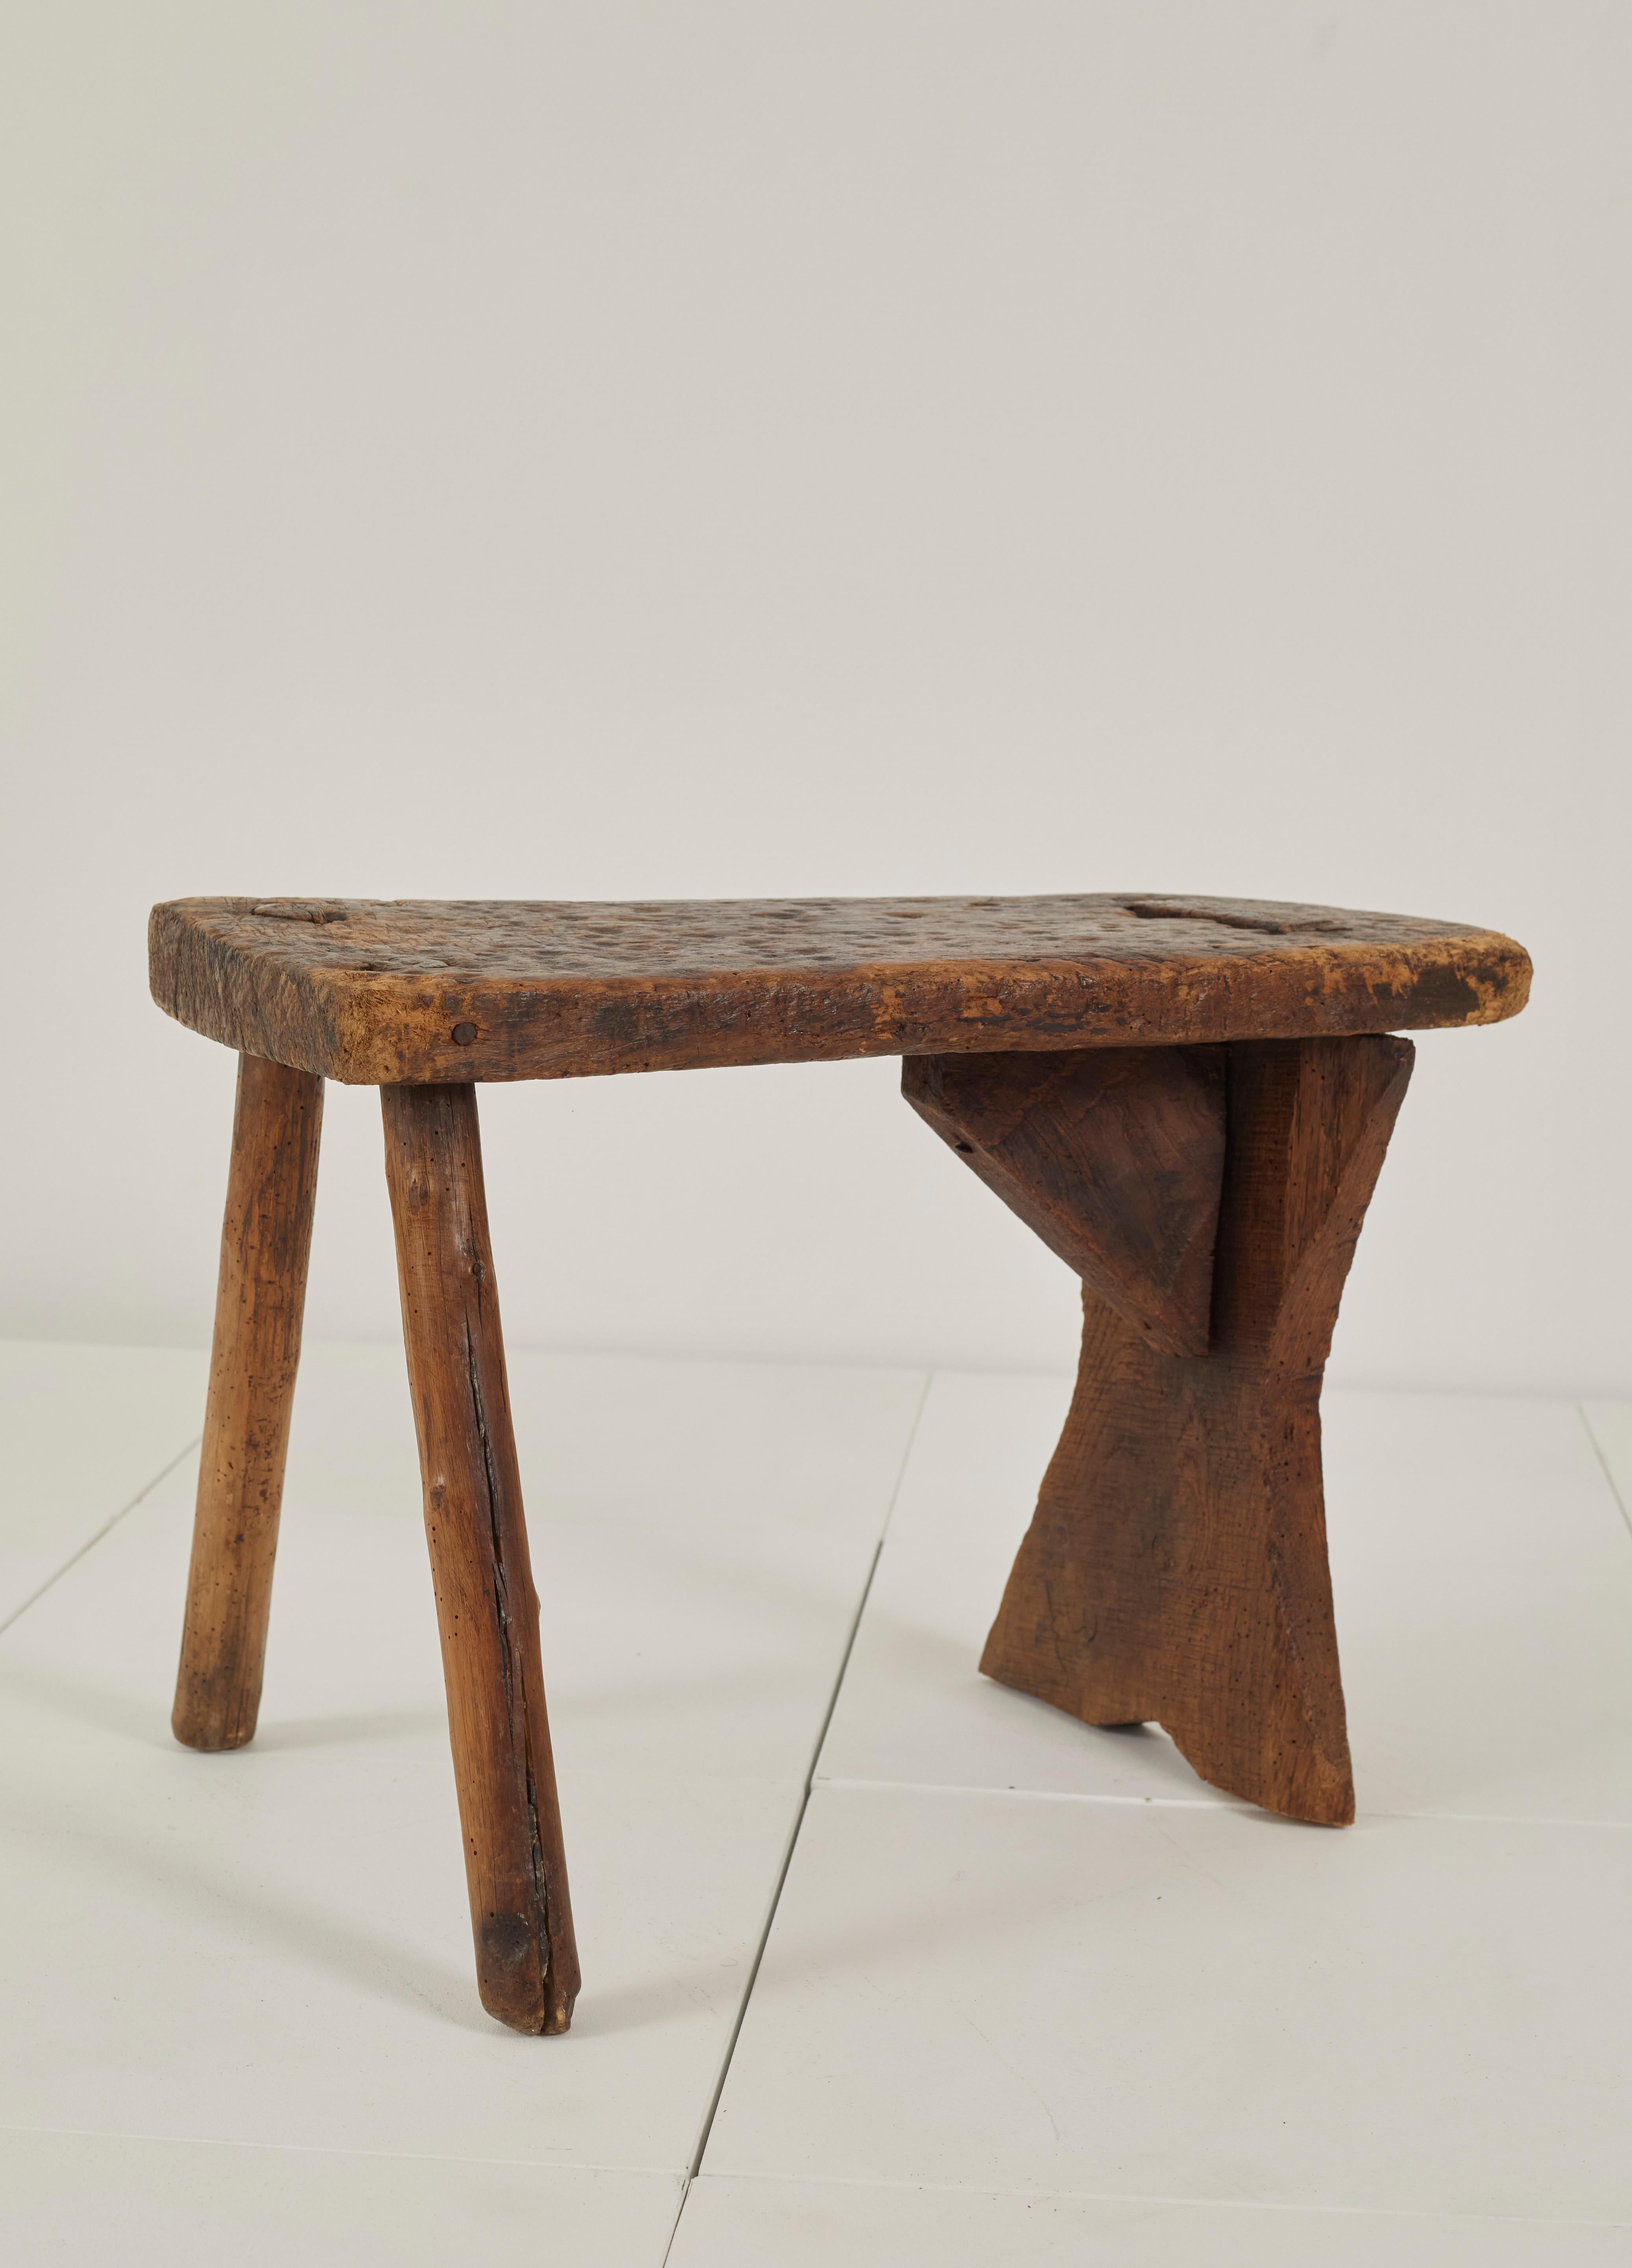 Hand-Carved Primitive, Rustic, Antique Bench / Stool, France, 19th Century For Sale